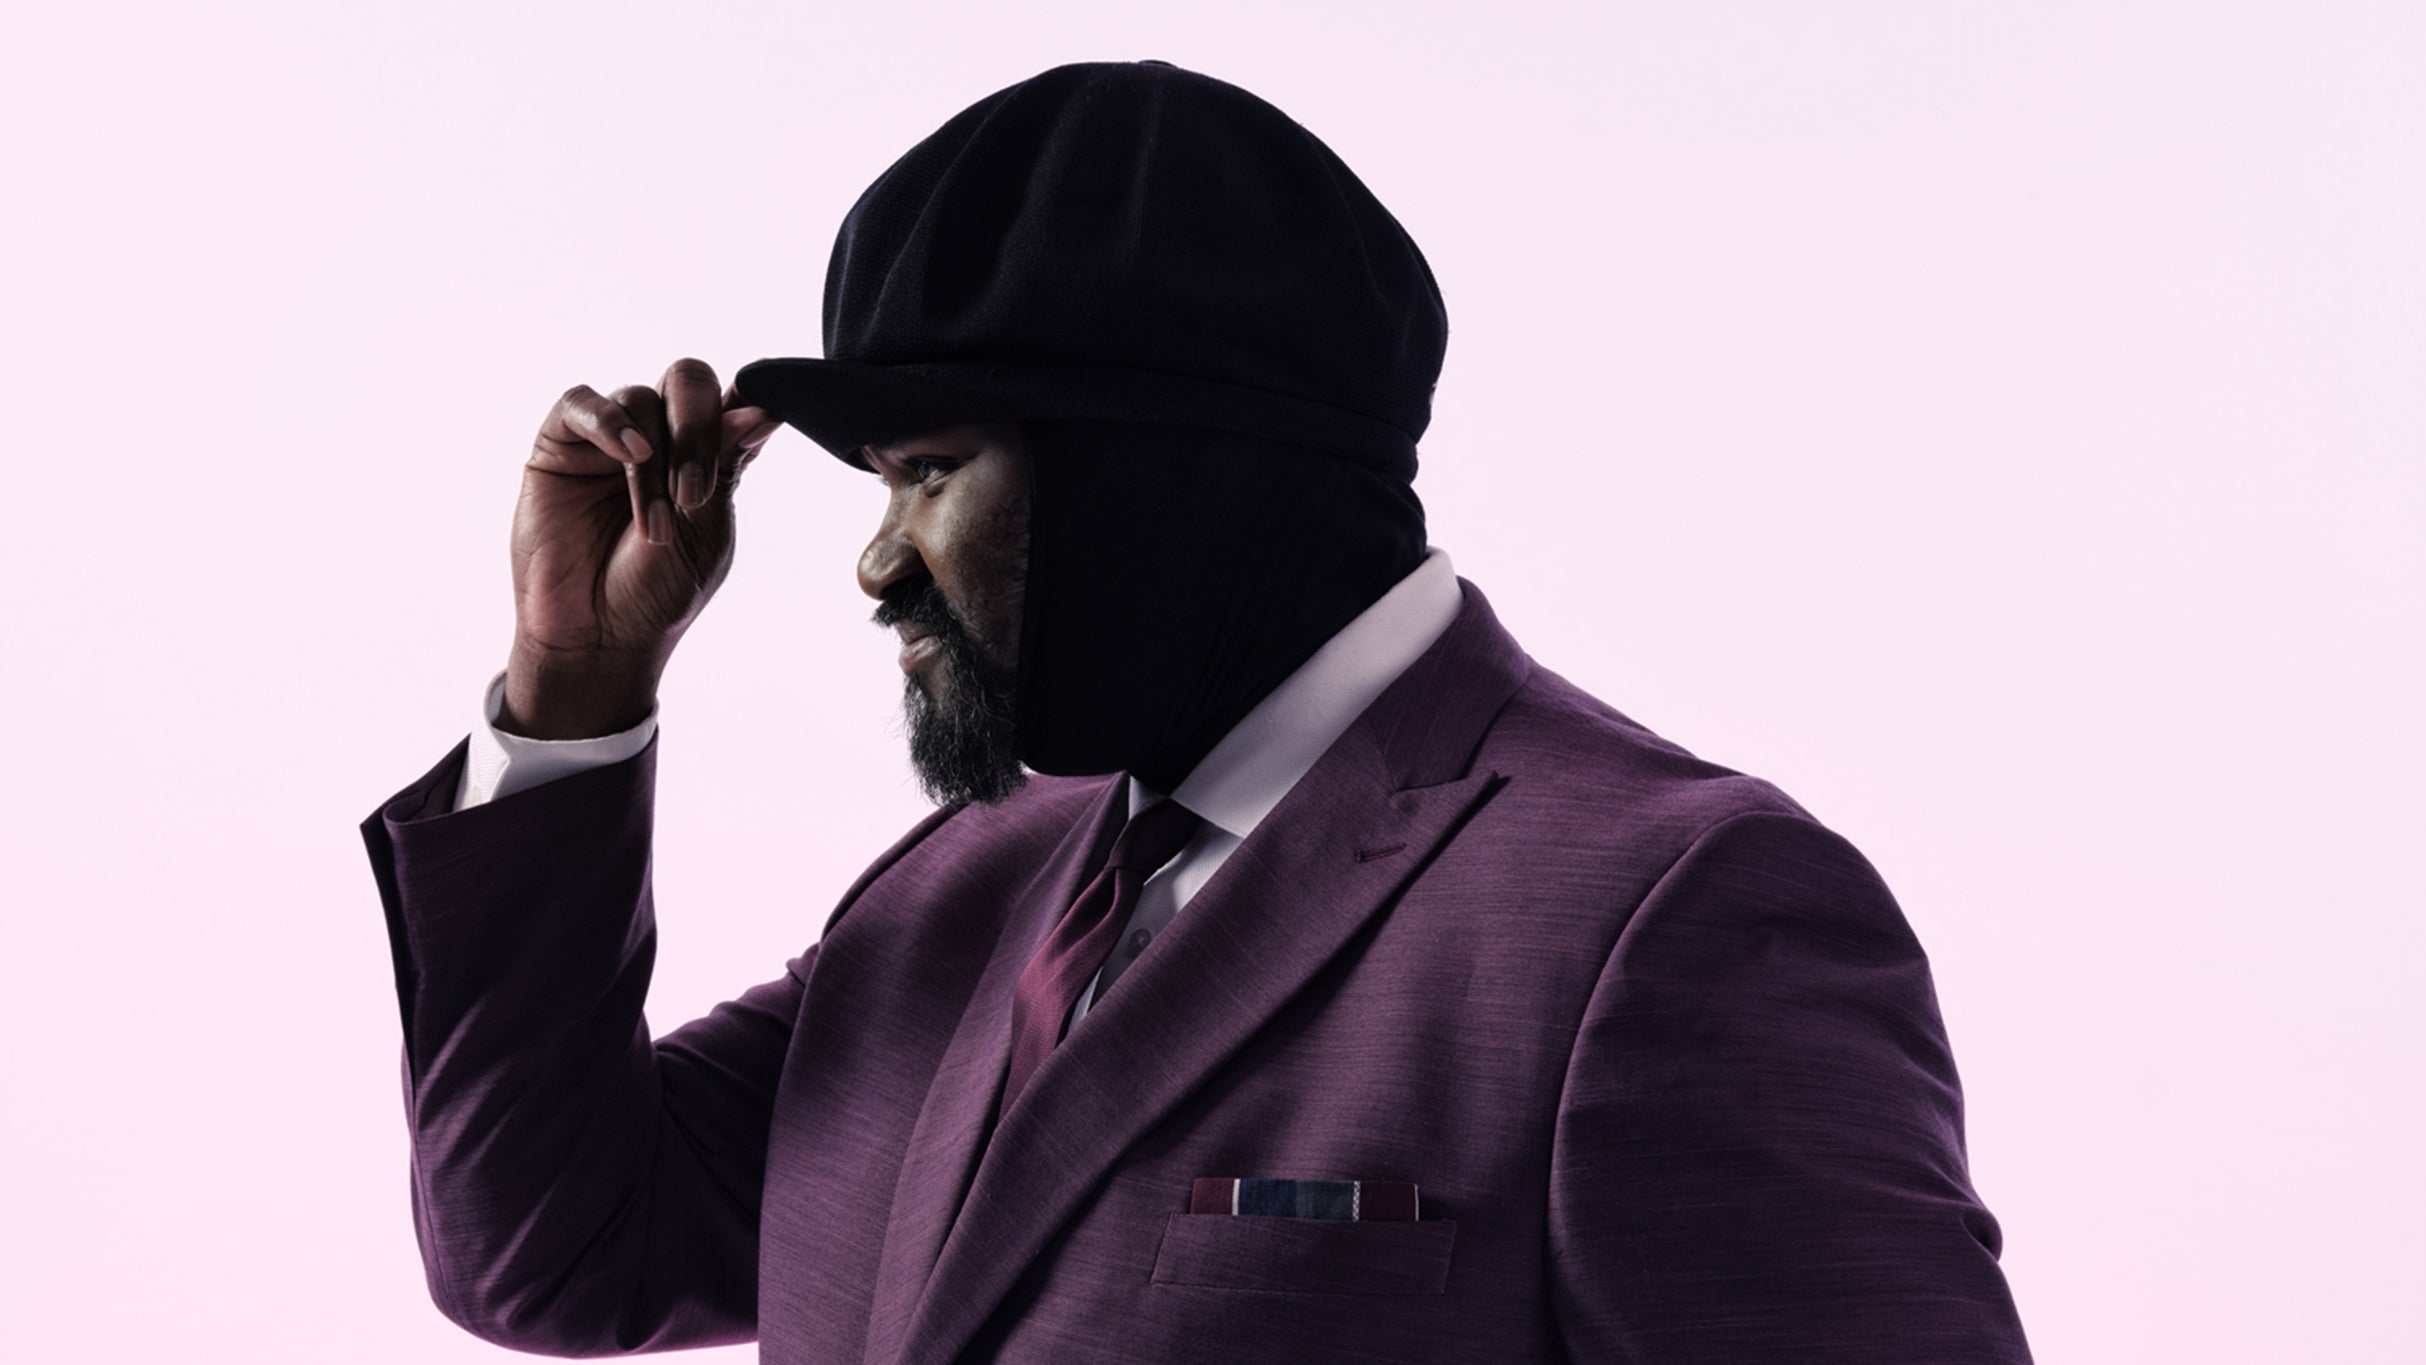 An Evening With Gregory Porter - 2023 Holiday Tour free pre-sale pa55w0rd for early tickets in Detroit